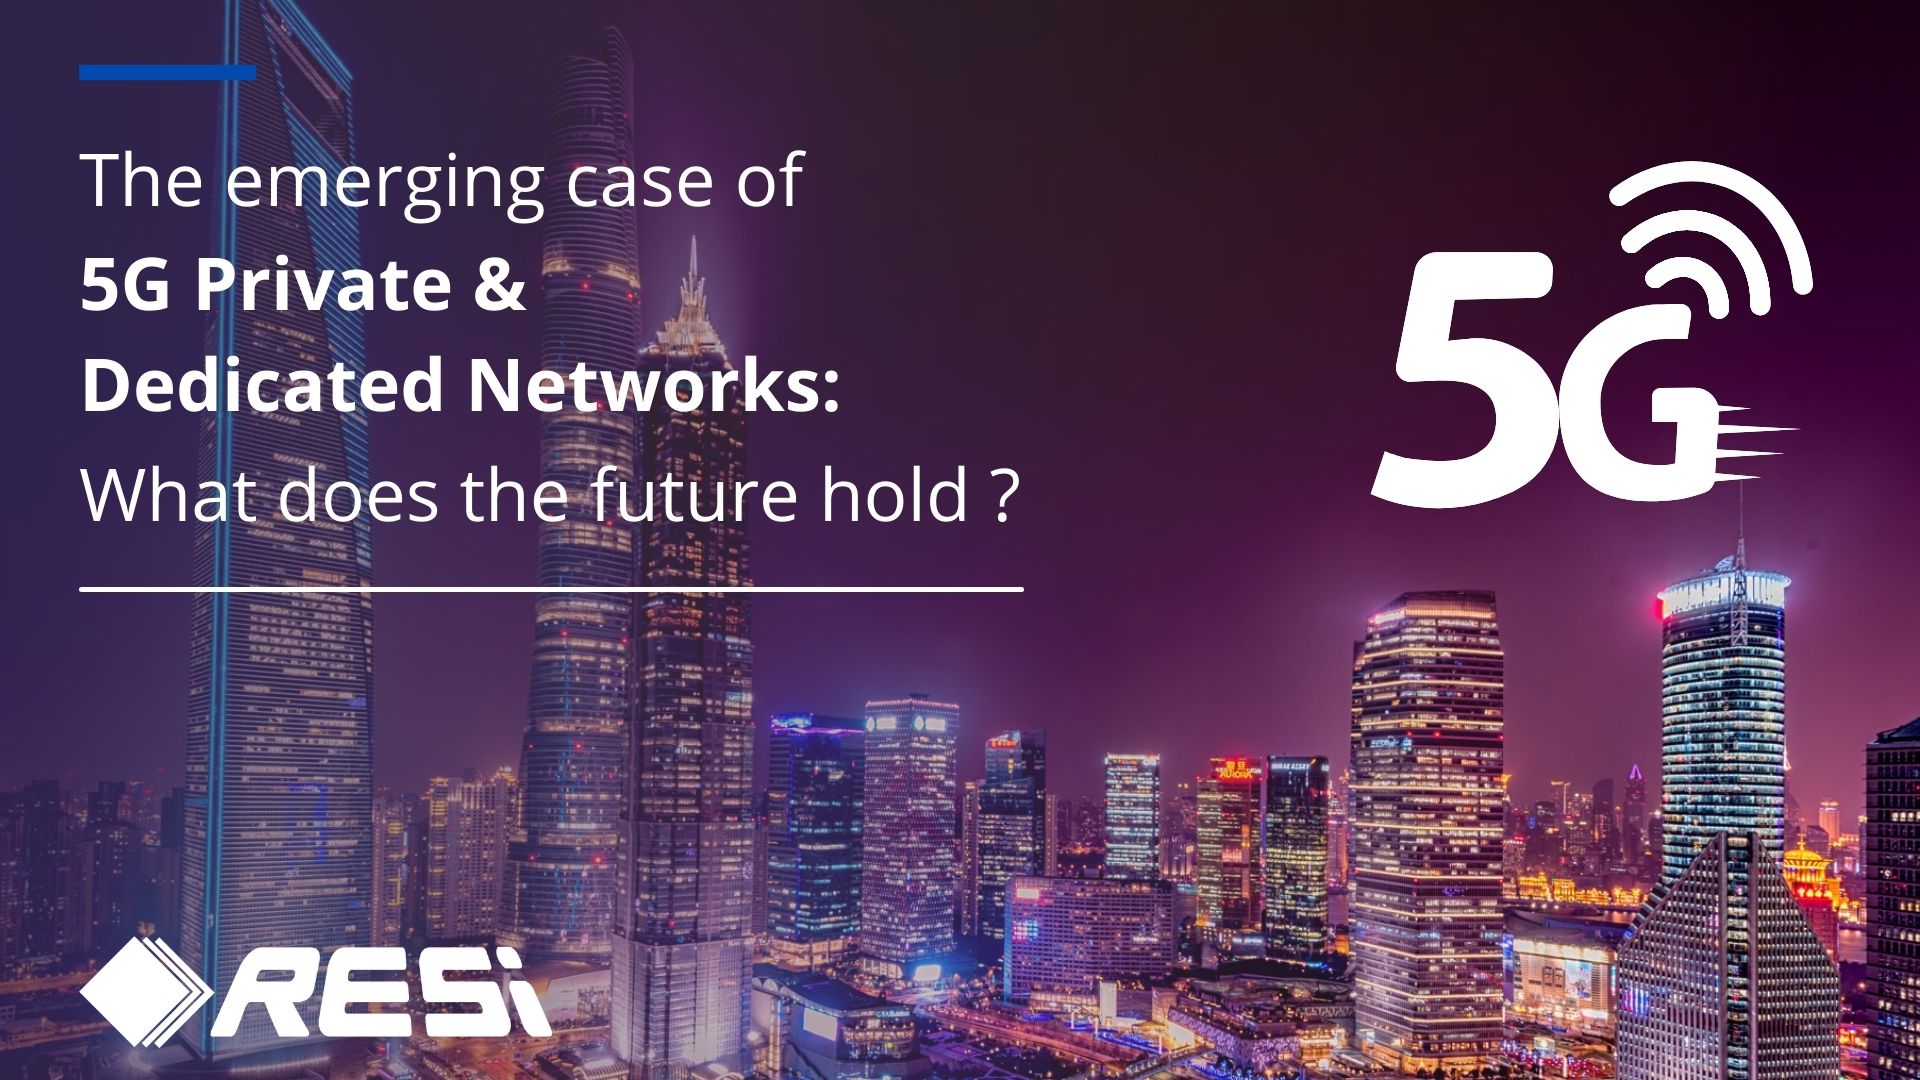 5G Private and Dedicated networks to faster realize Industry 4.0